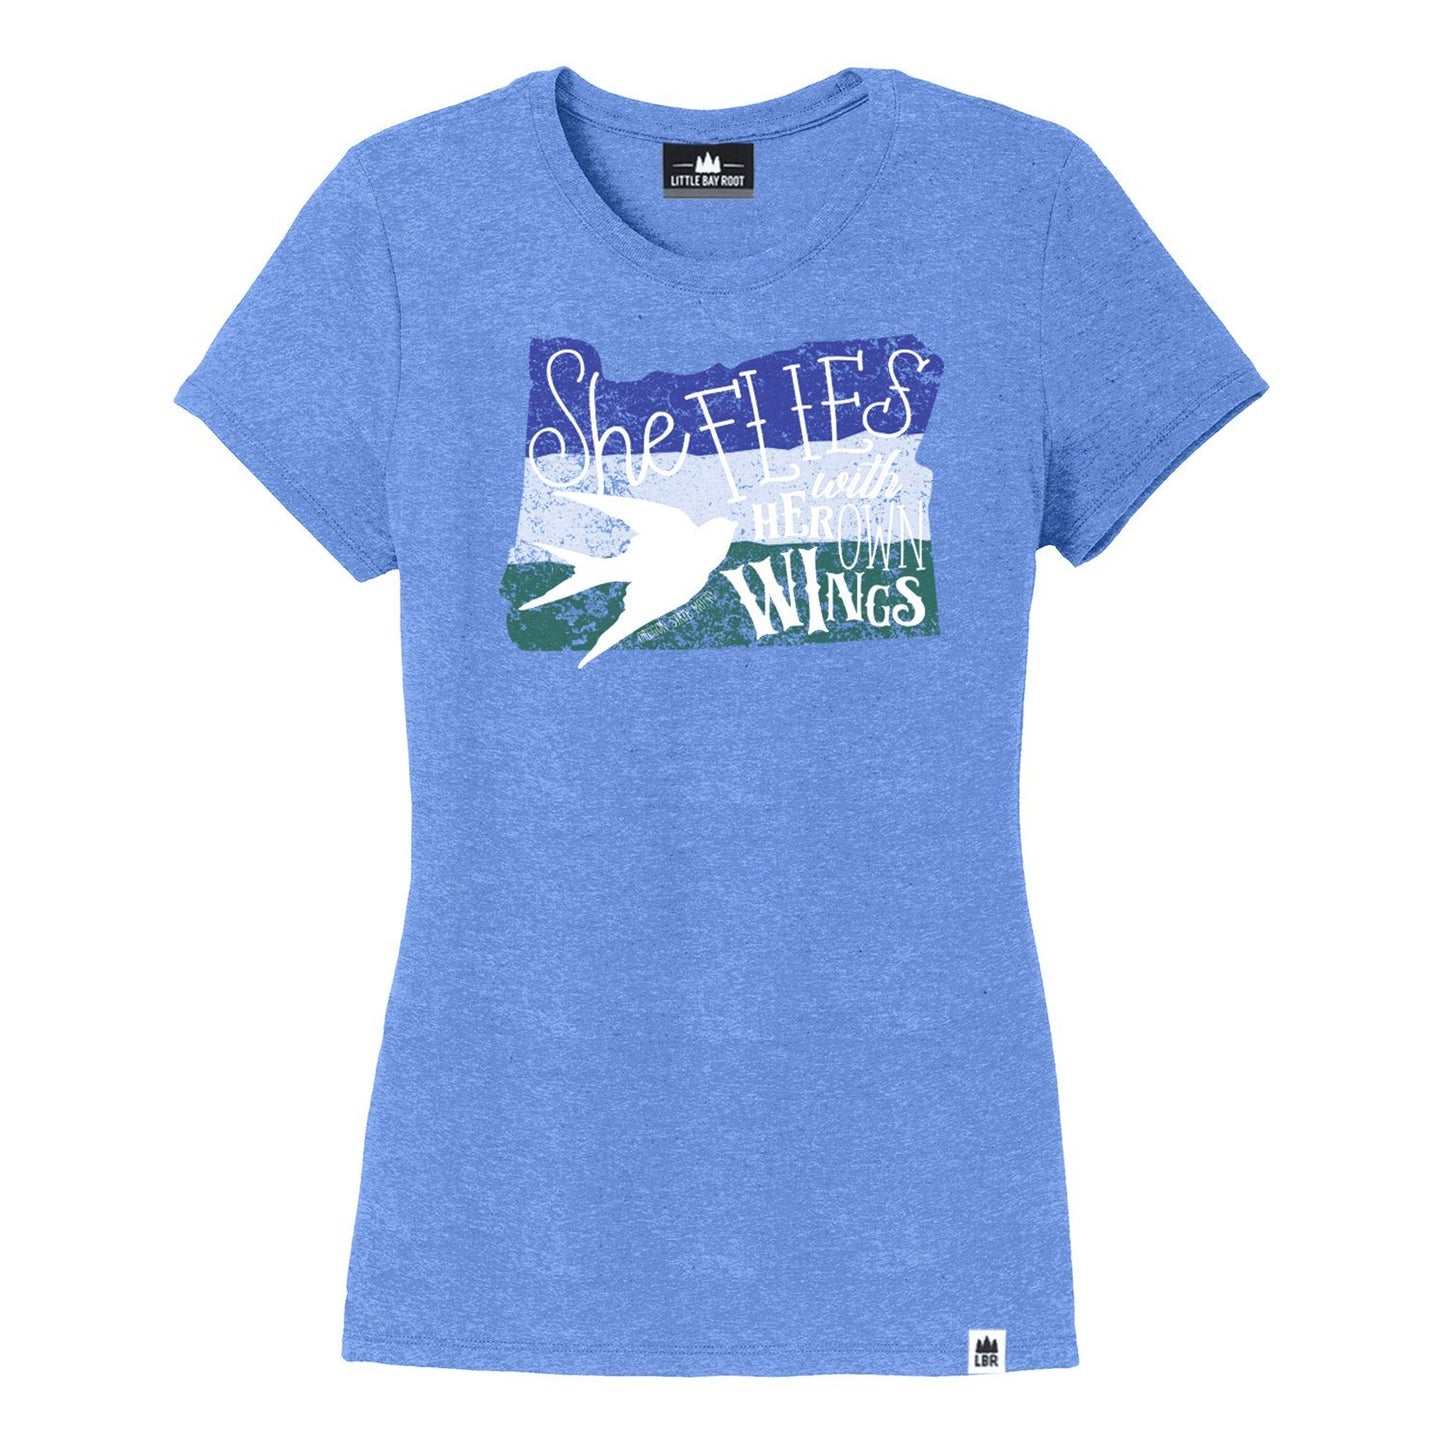 She Flies with Her Own Wings | Women's Crewneck T-Shirt